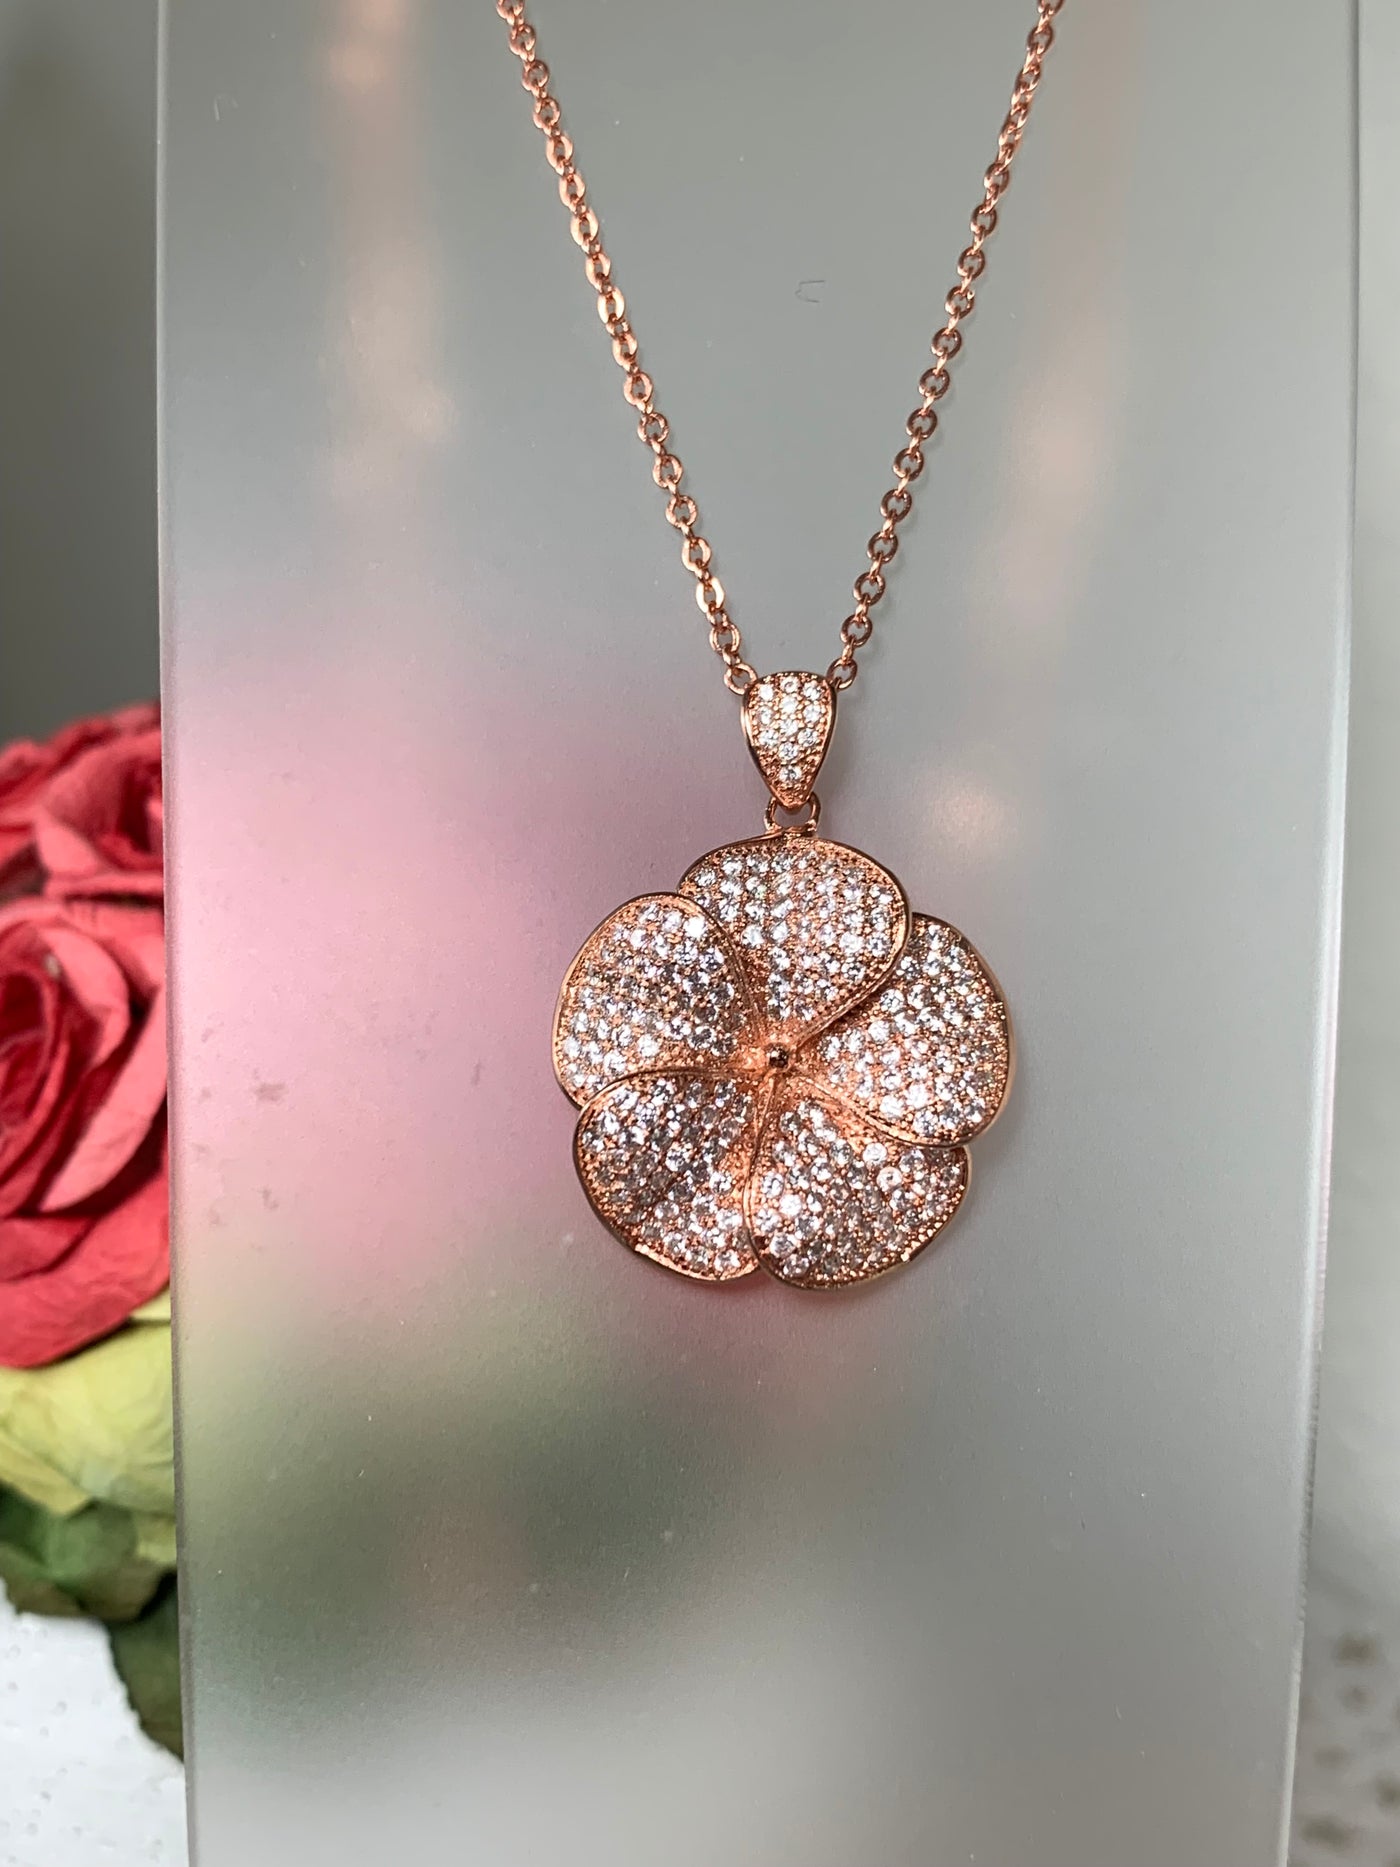 "Larger" Pave Set Cubic Zirconia Flower Pendant in Silver, Yellow and Rose Gold Tone